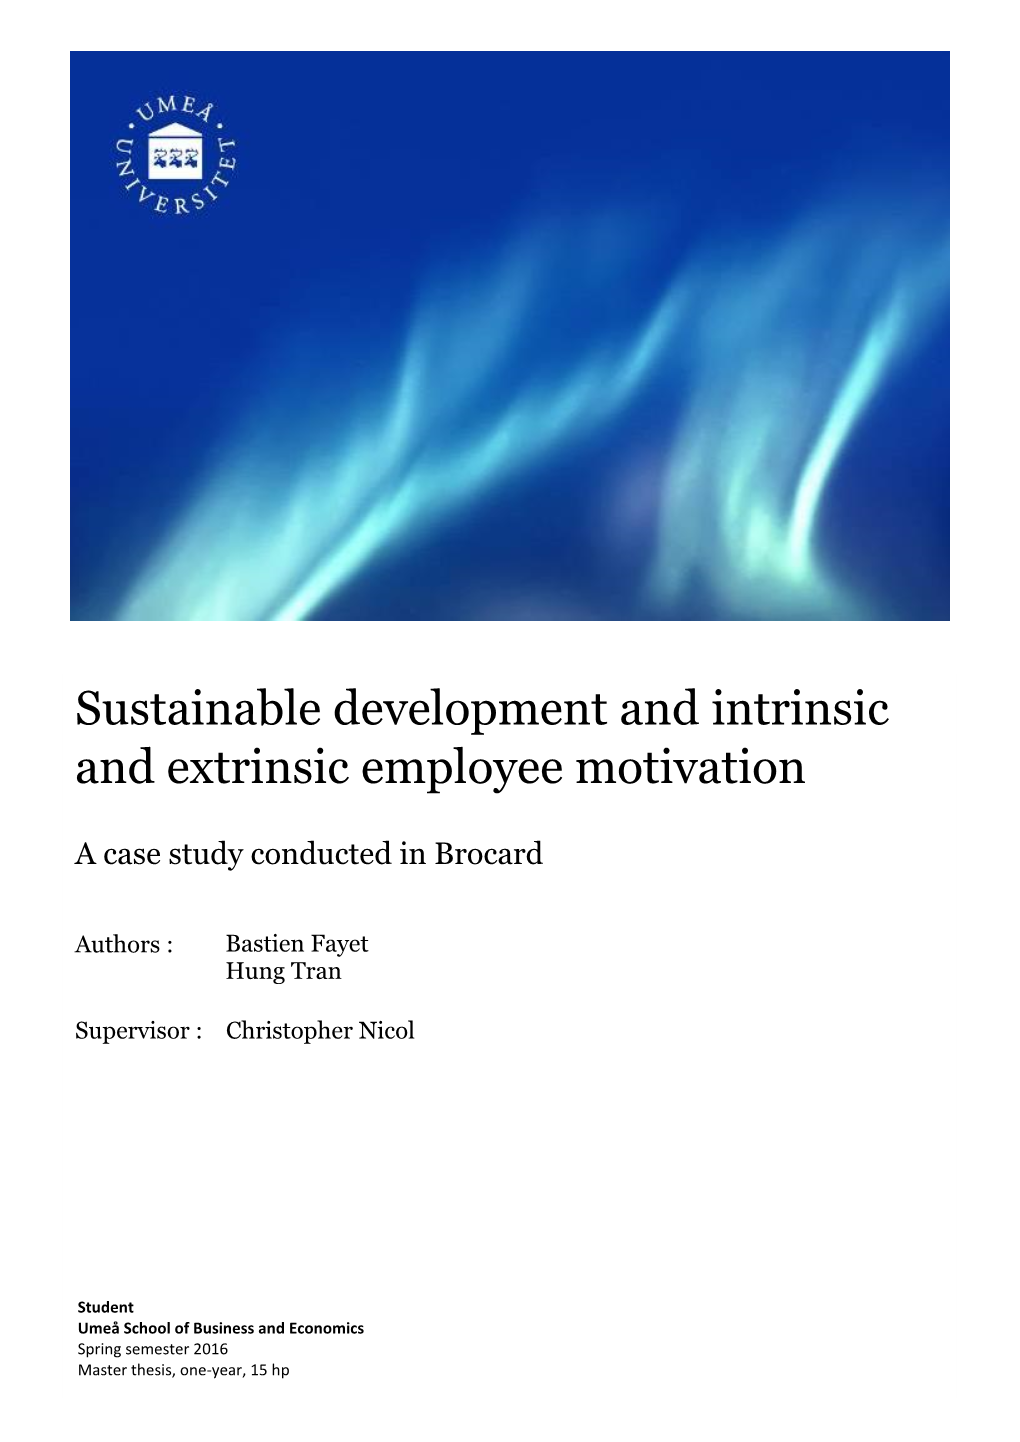 Sustainable Development and Intrinsic and Extrinsic Employee Motivation